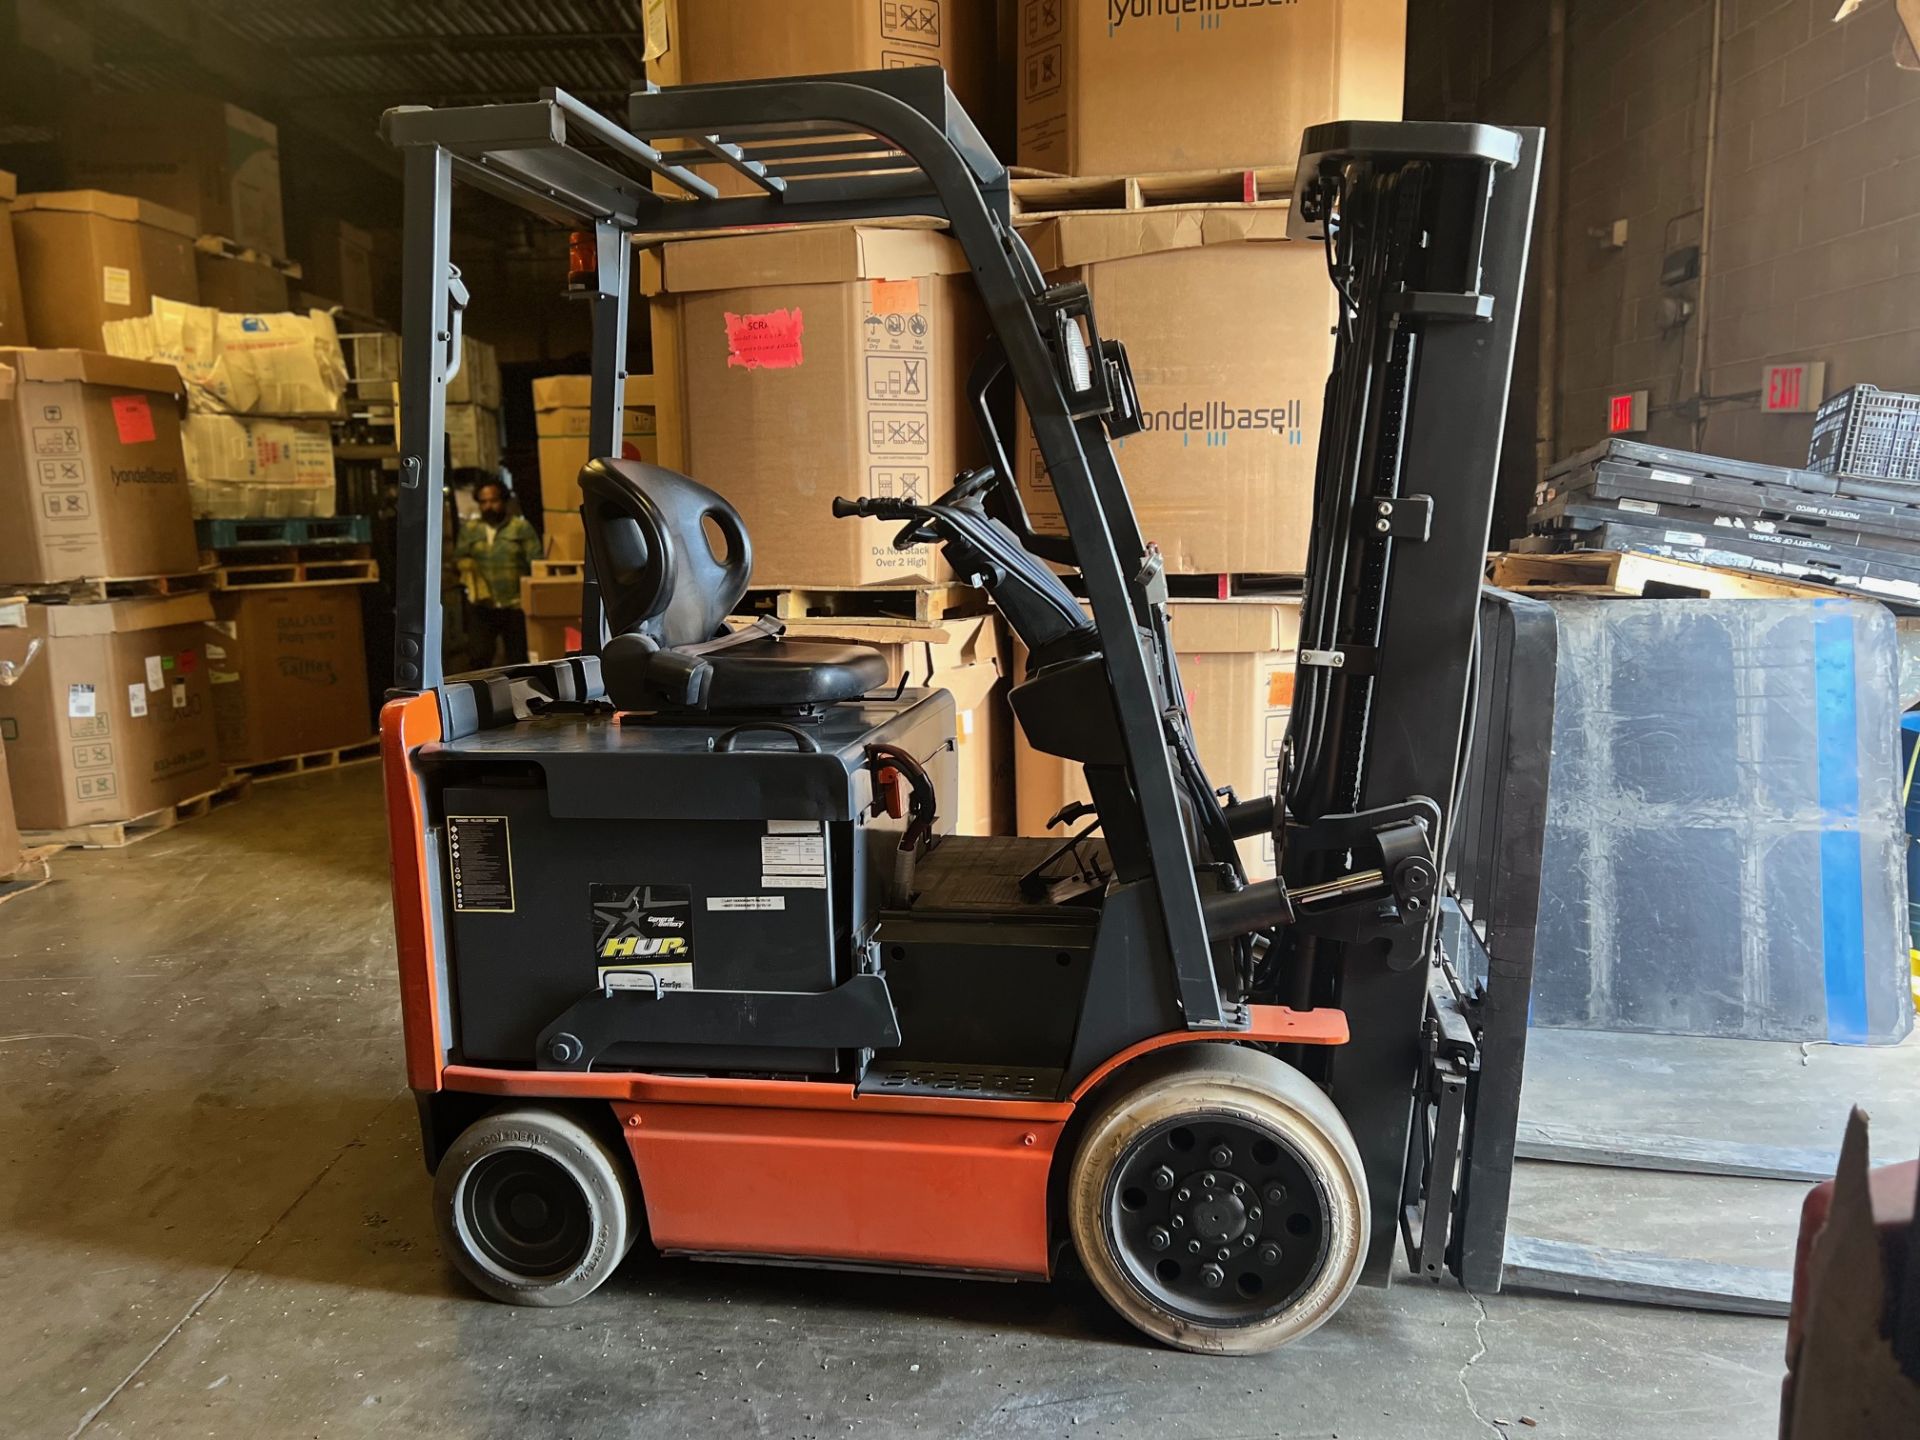 TOYOTA ELECTRIC FORKLIFT, MODEL 8FBCU25, LIFTING CAPACITY 4400 LBS, HRS 8359 - Image 2 of 6